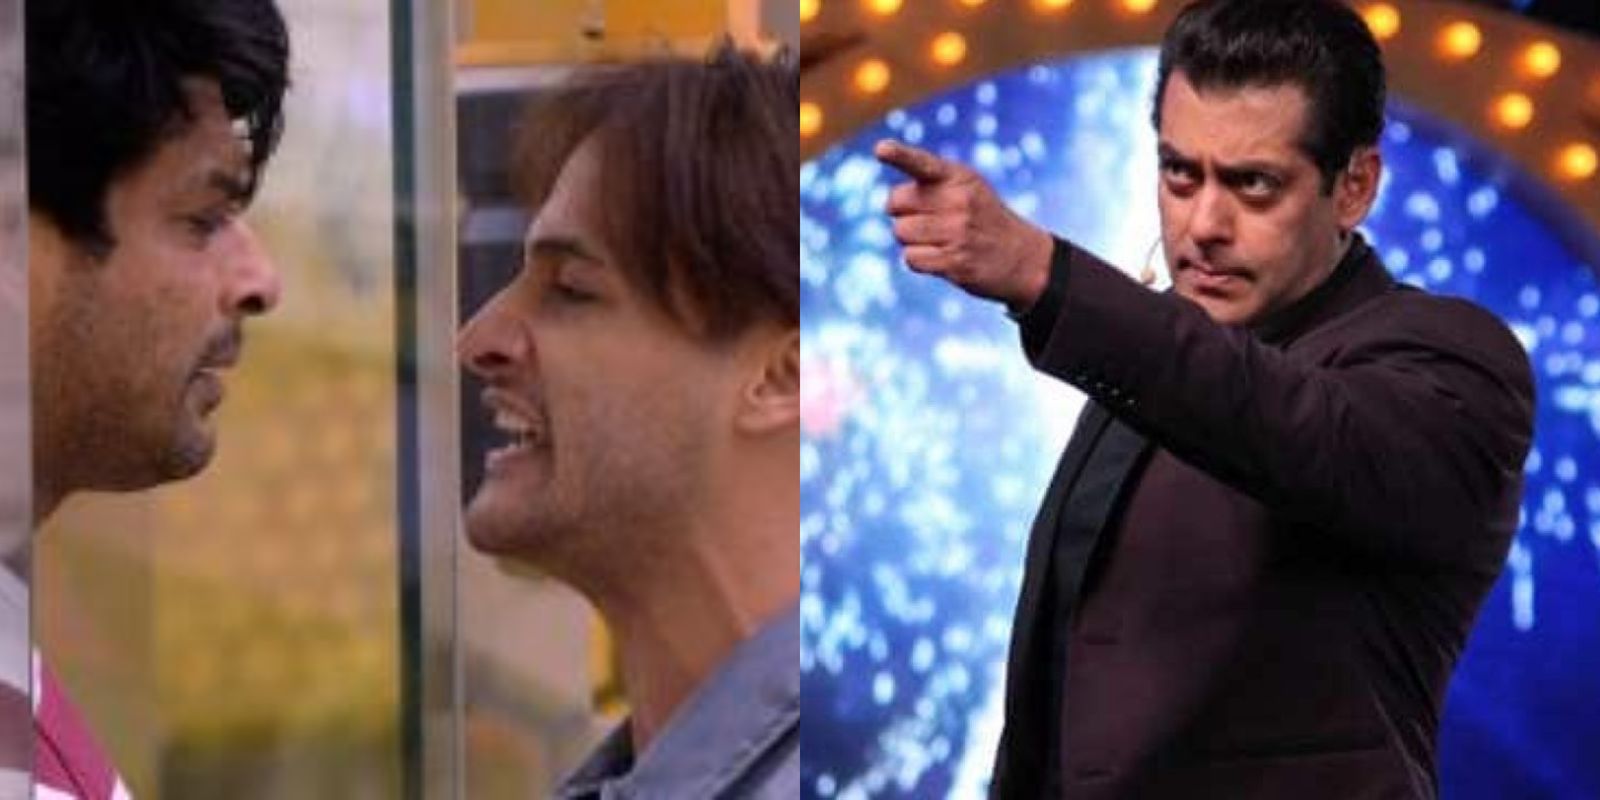 Bigg Boss 13 Preview: Salman Khan To Open Gates For Sidharth Shukla, Asim Riaz So They Can Go Out And Fight